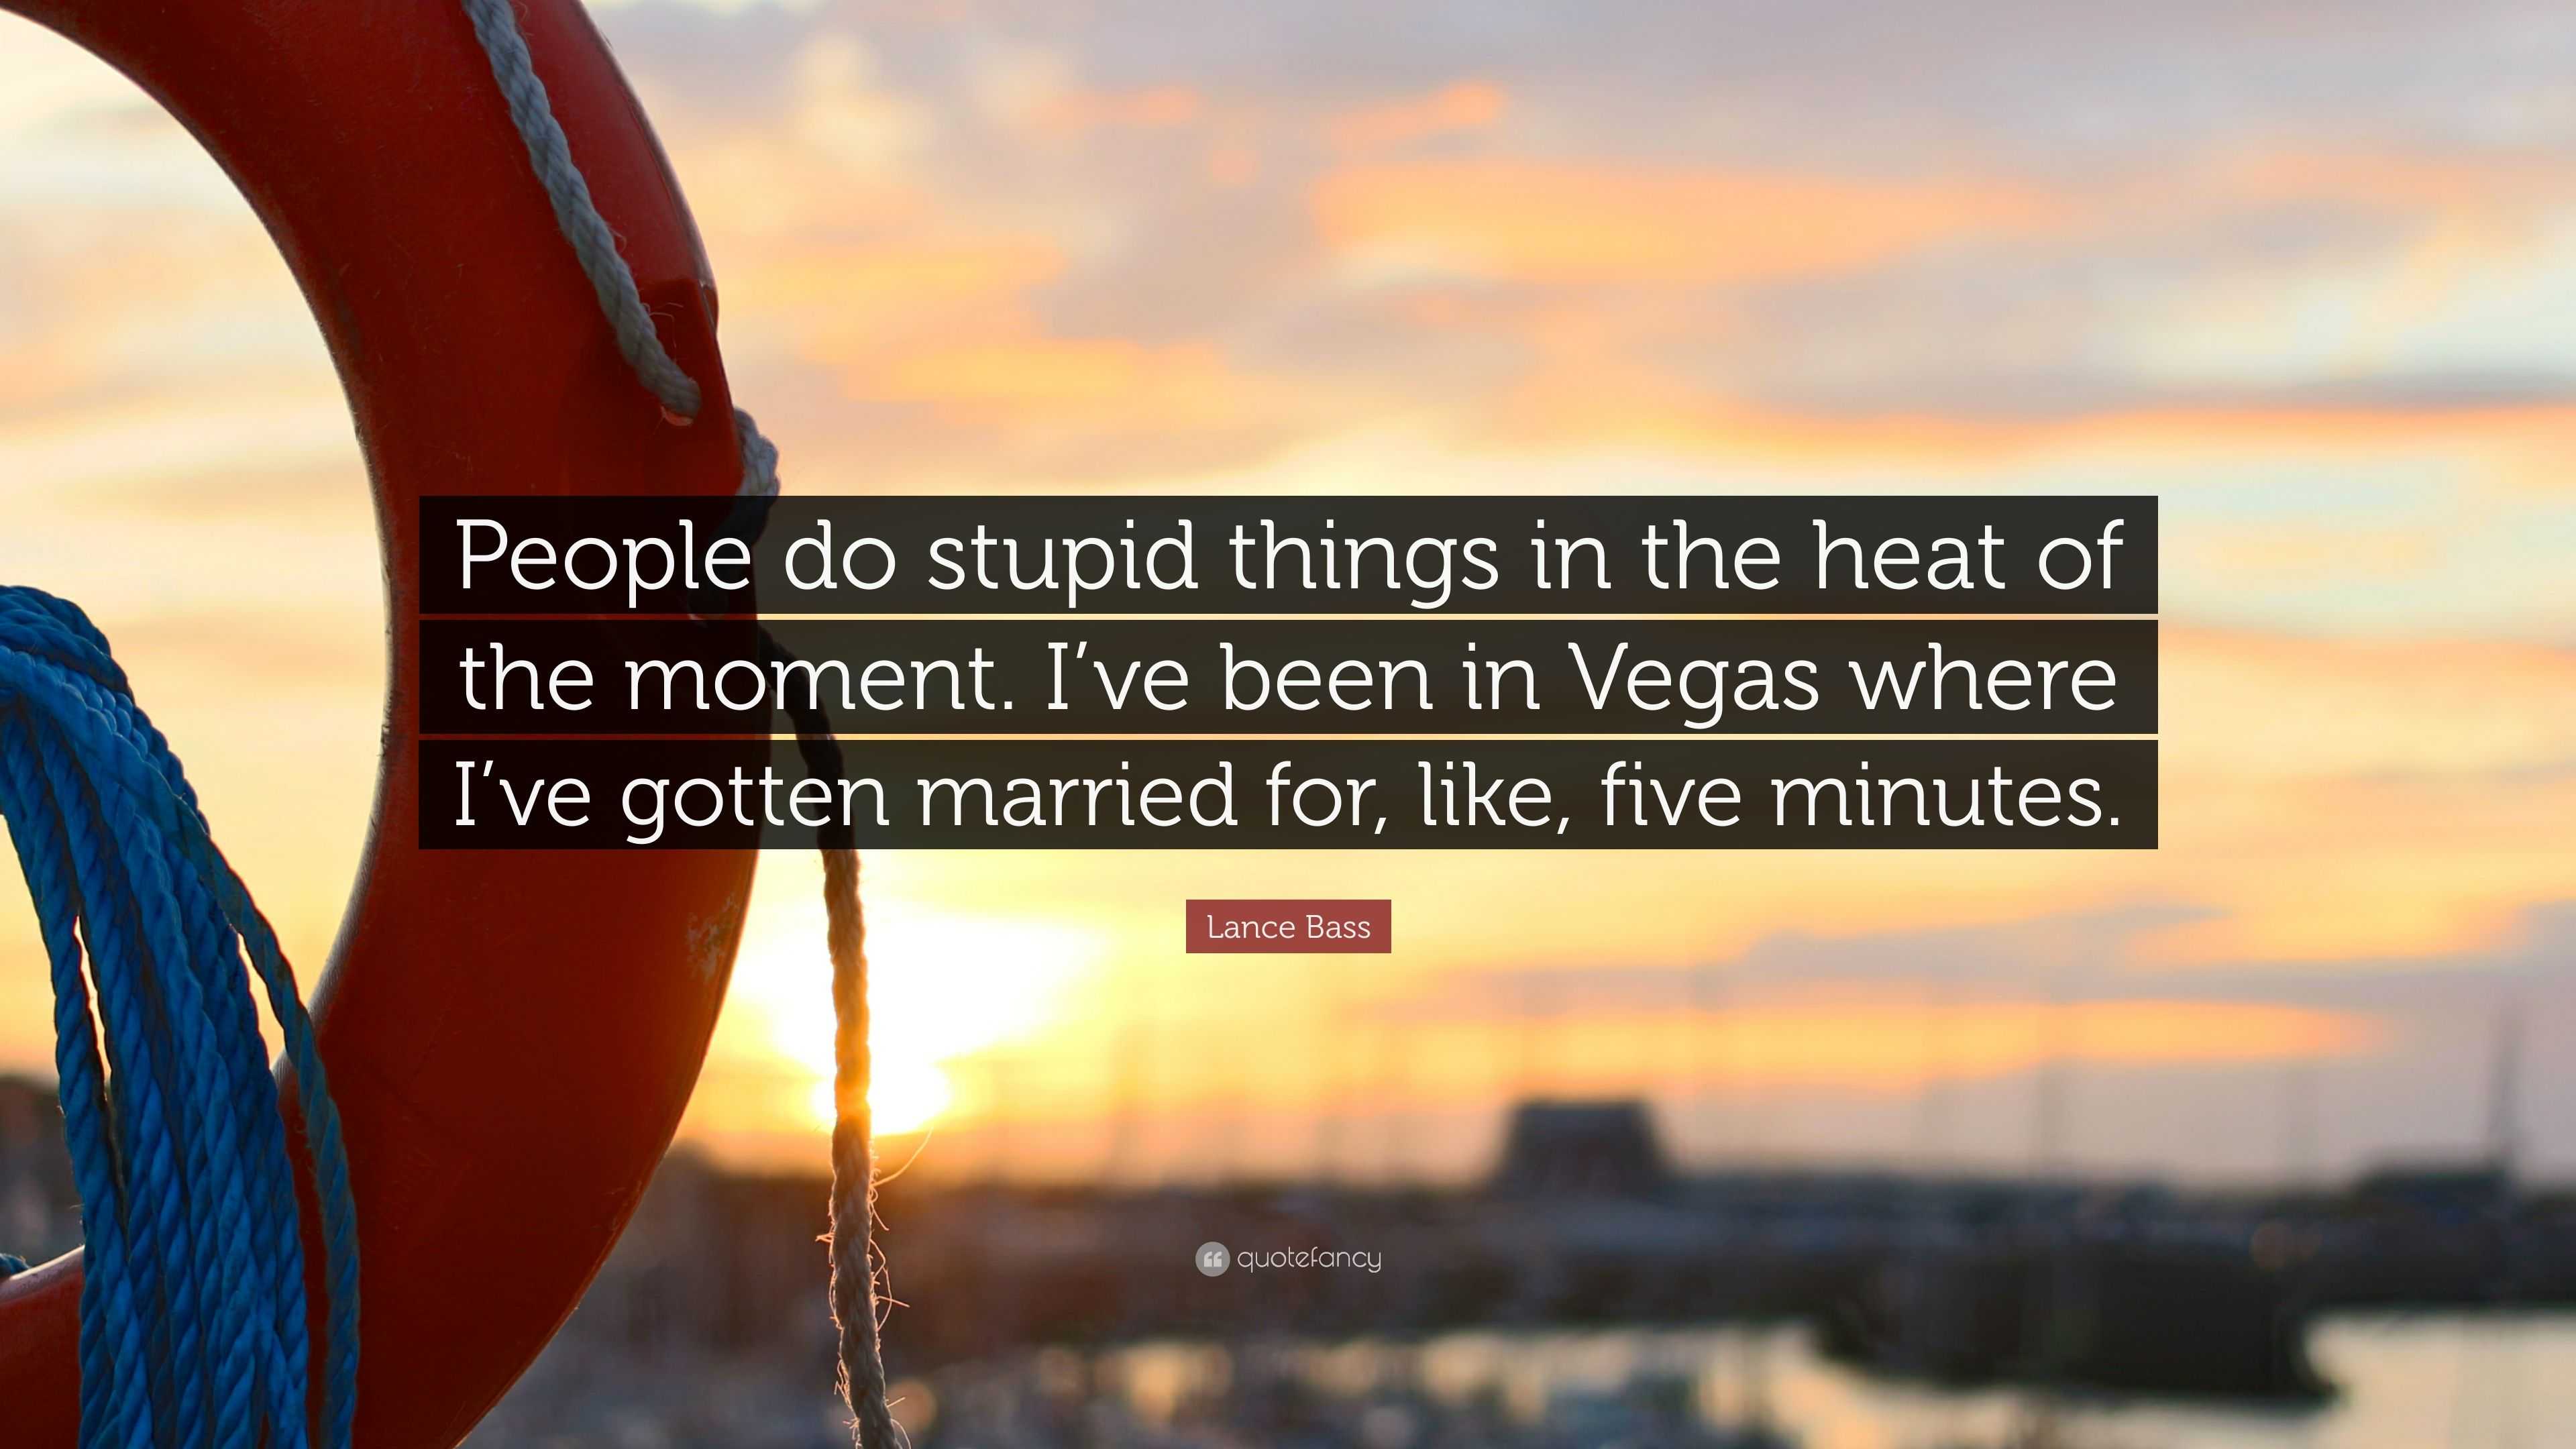 Lance Bass Quote People Do Stupid Things In The Heat Of The Moment Ive Been In Vegas Where I